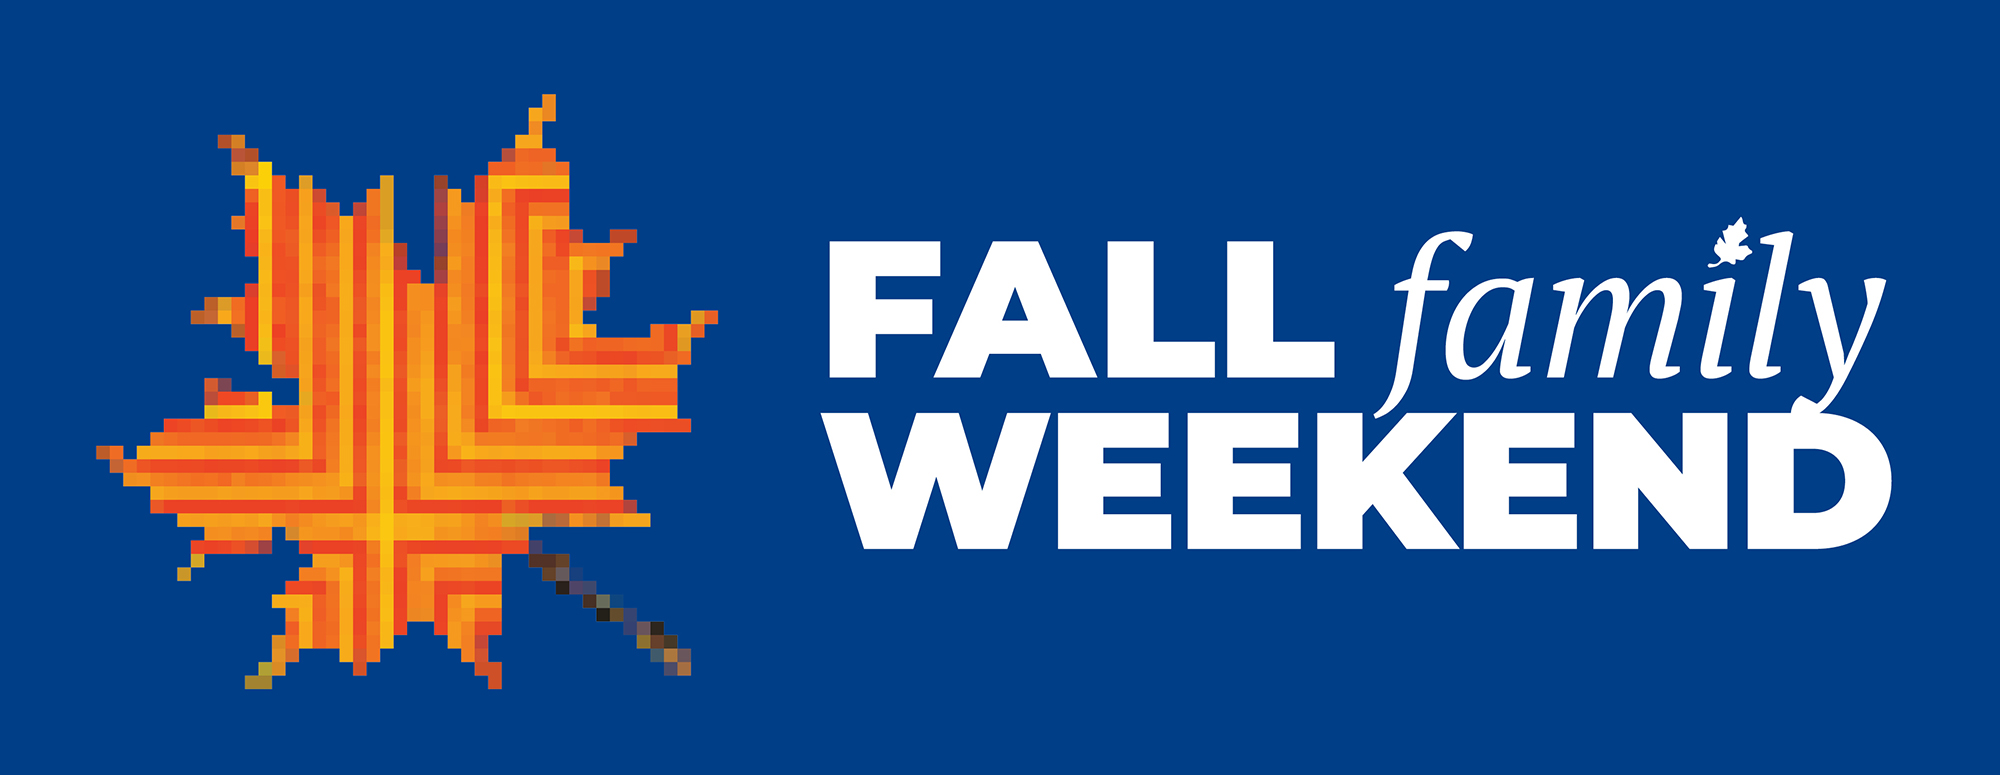 Fall family weekend logo with pixelated fall maple leaf